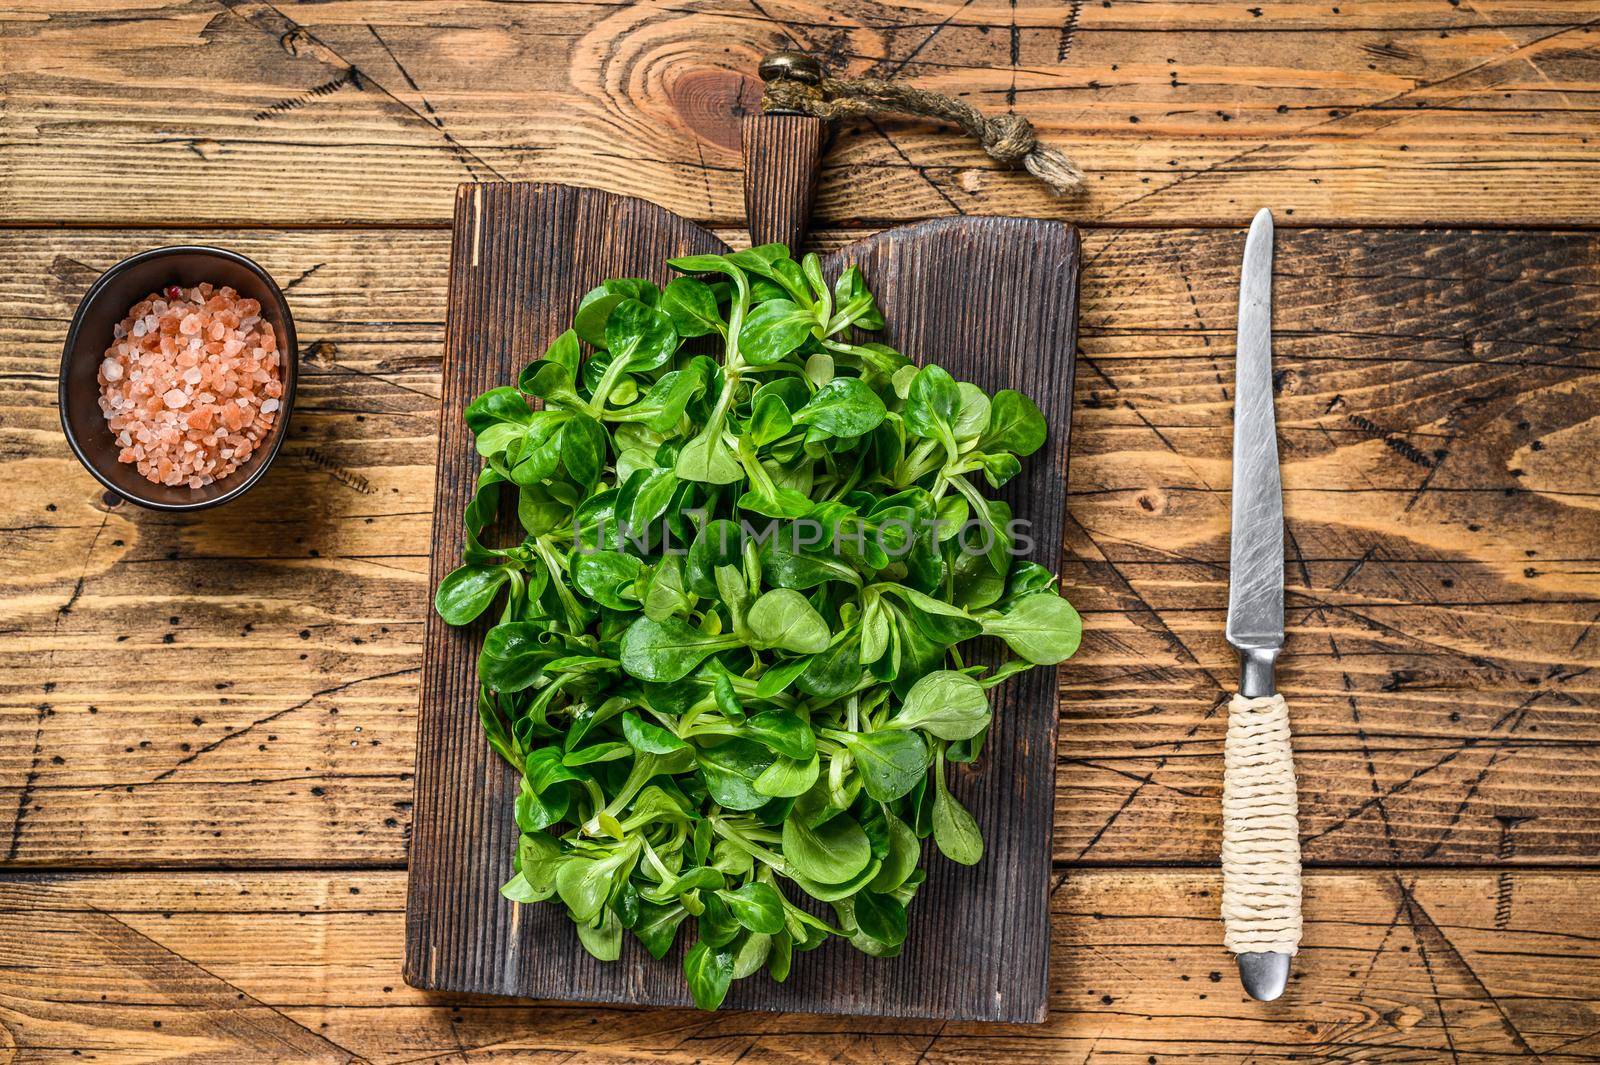 Fresh Raw green lambs lettuce Corn salad leaves on a wooden cutting board. wooden background. Top view.